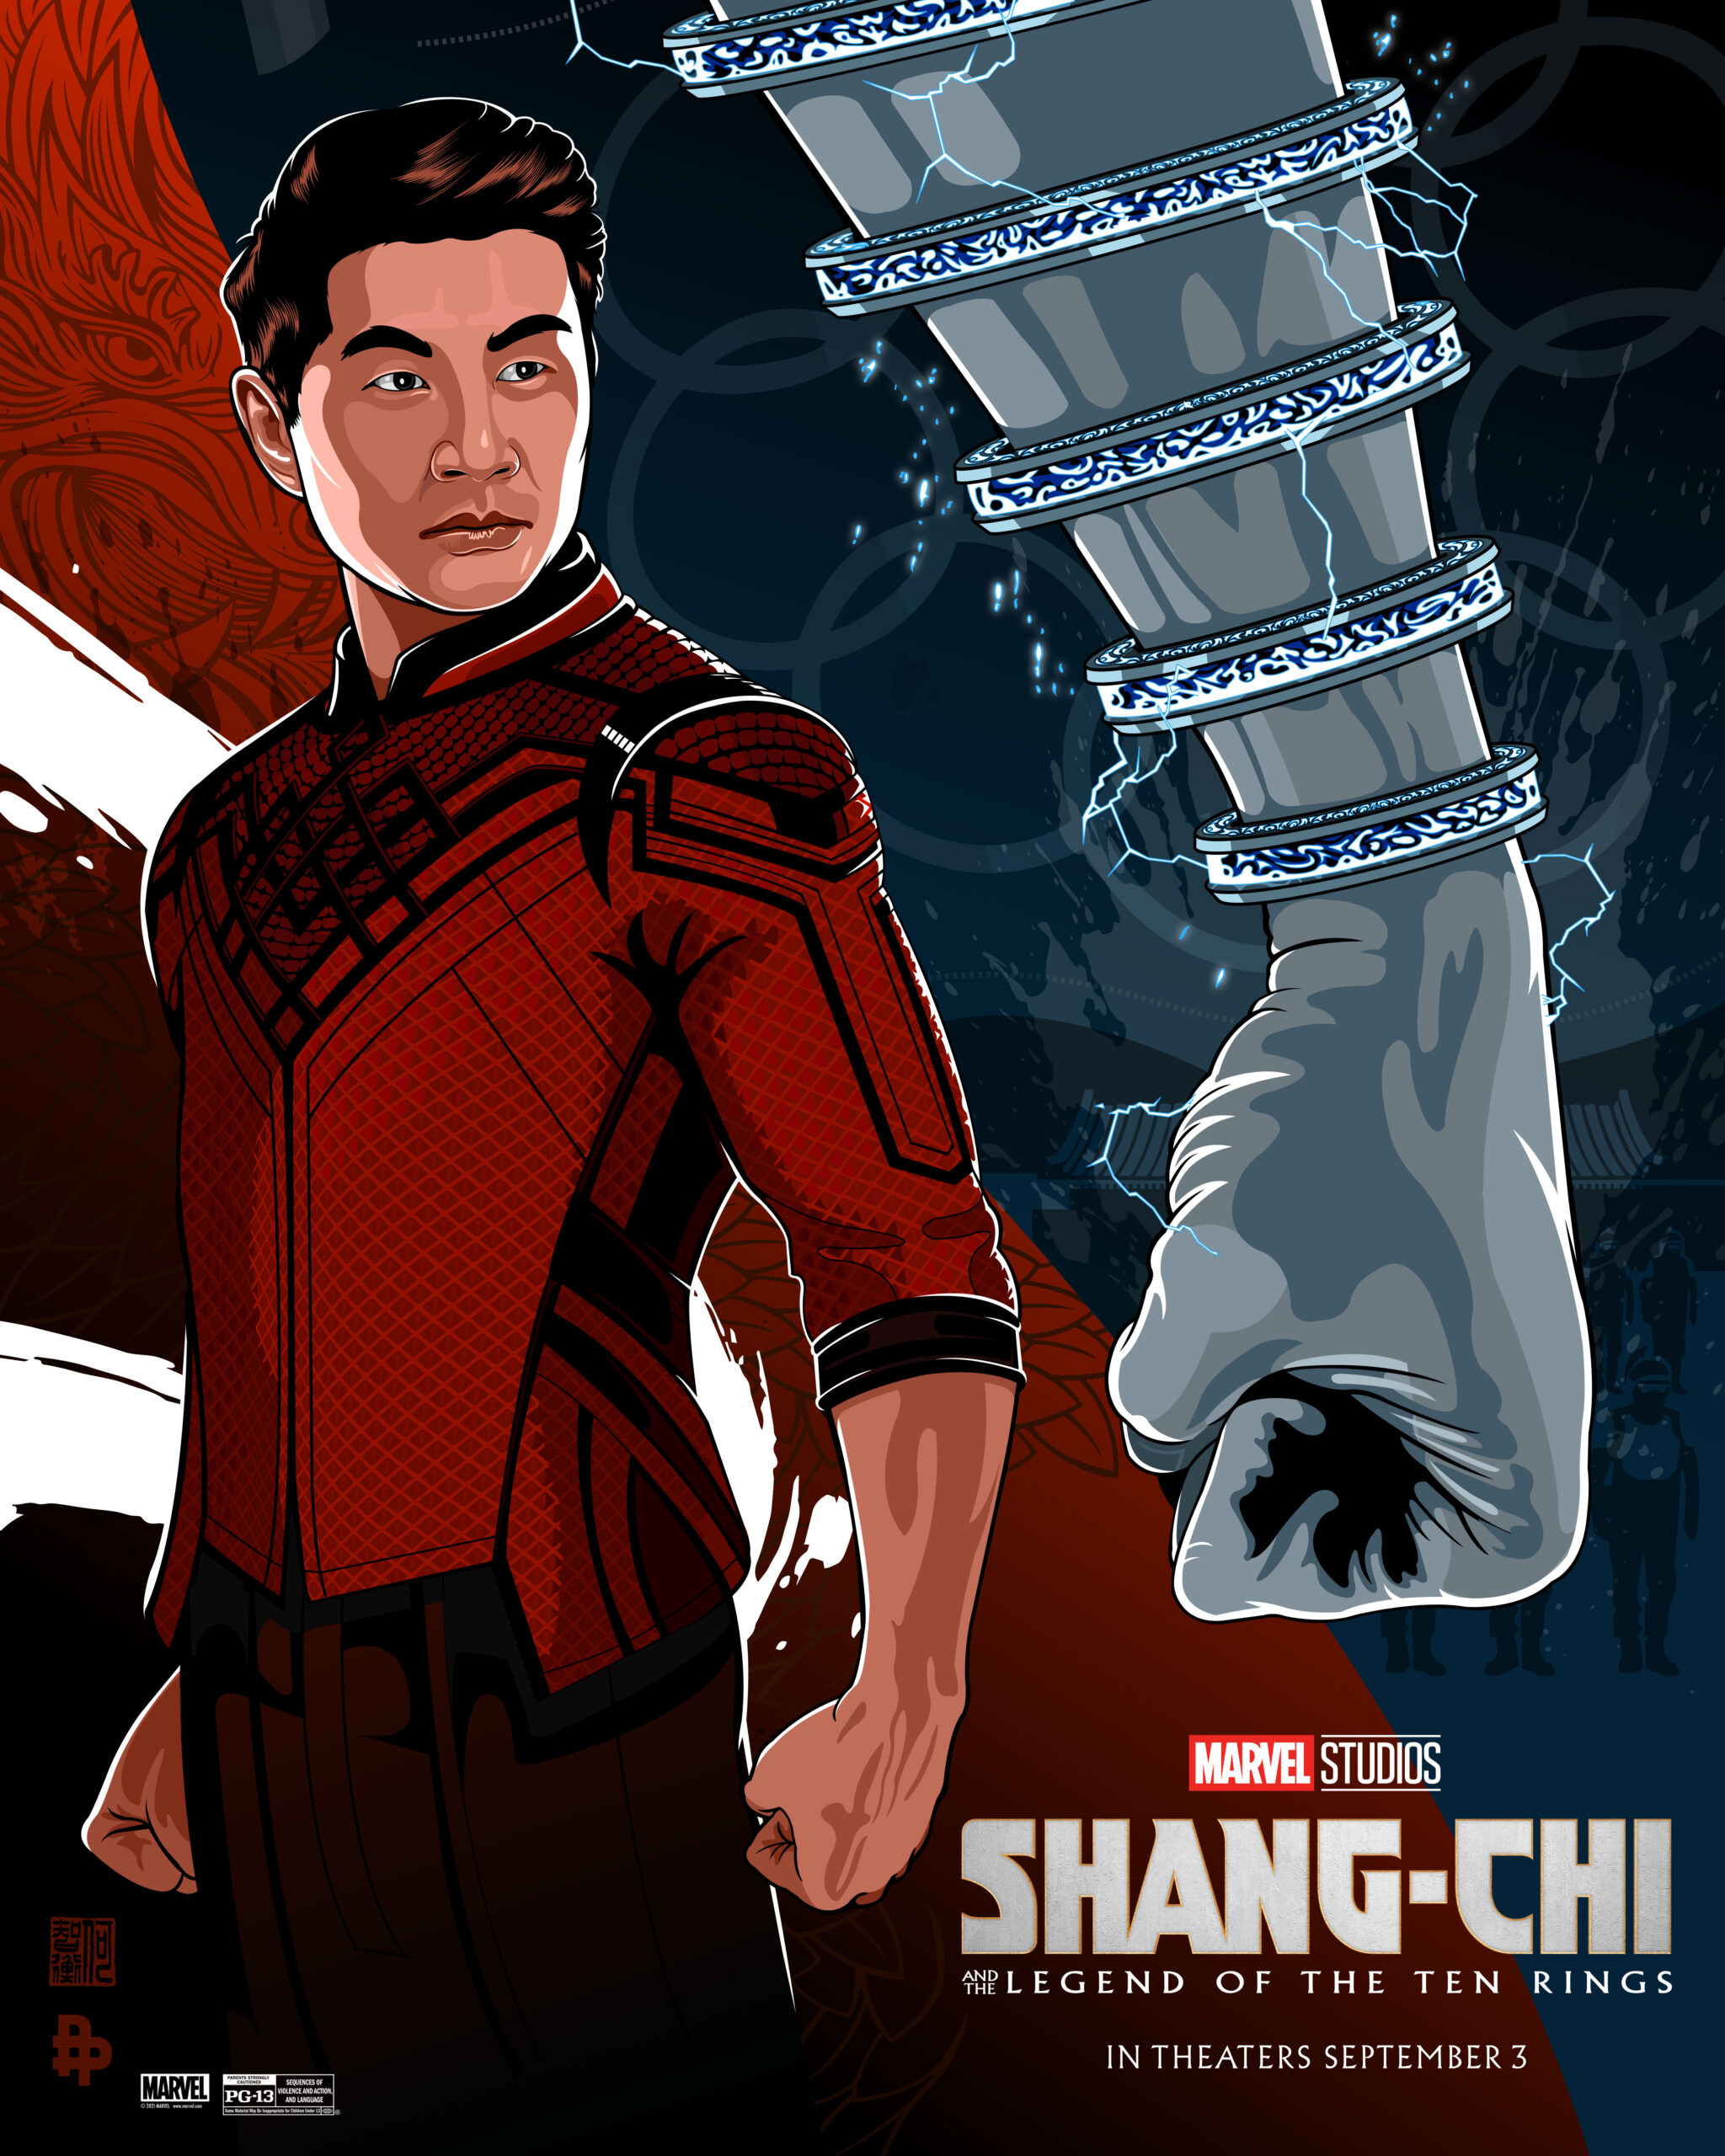 Artwork by Shang-Chi & The Legend of the Ten Rings – Digital Marketing